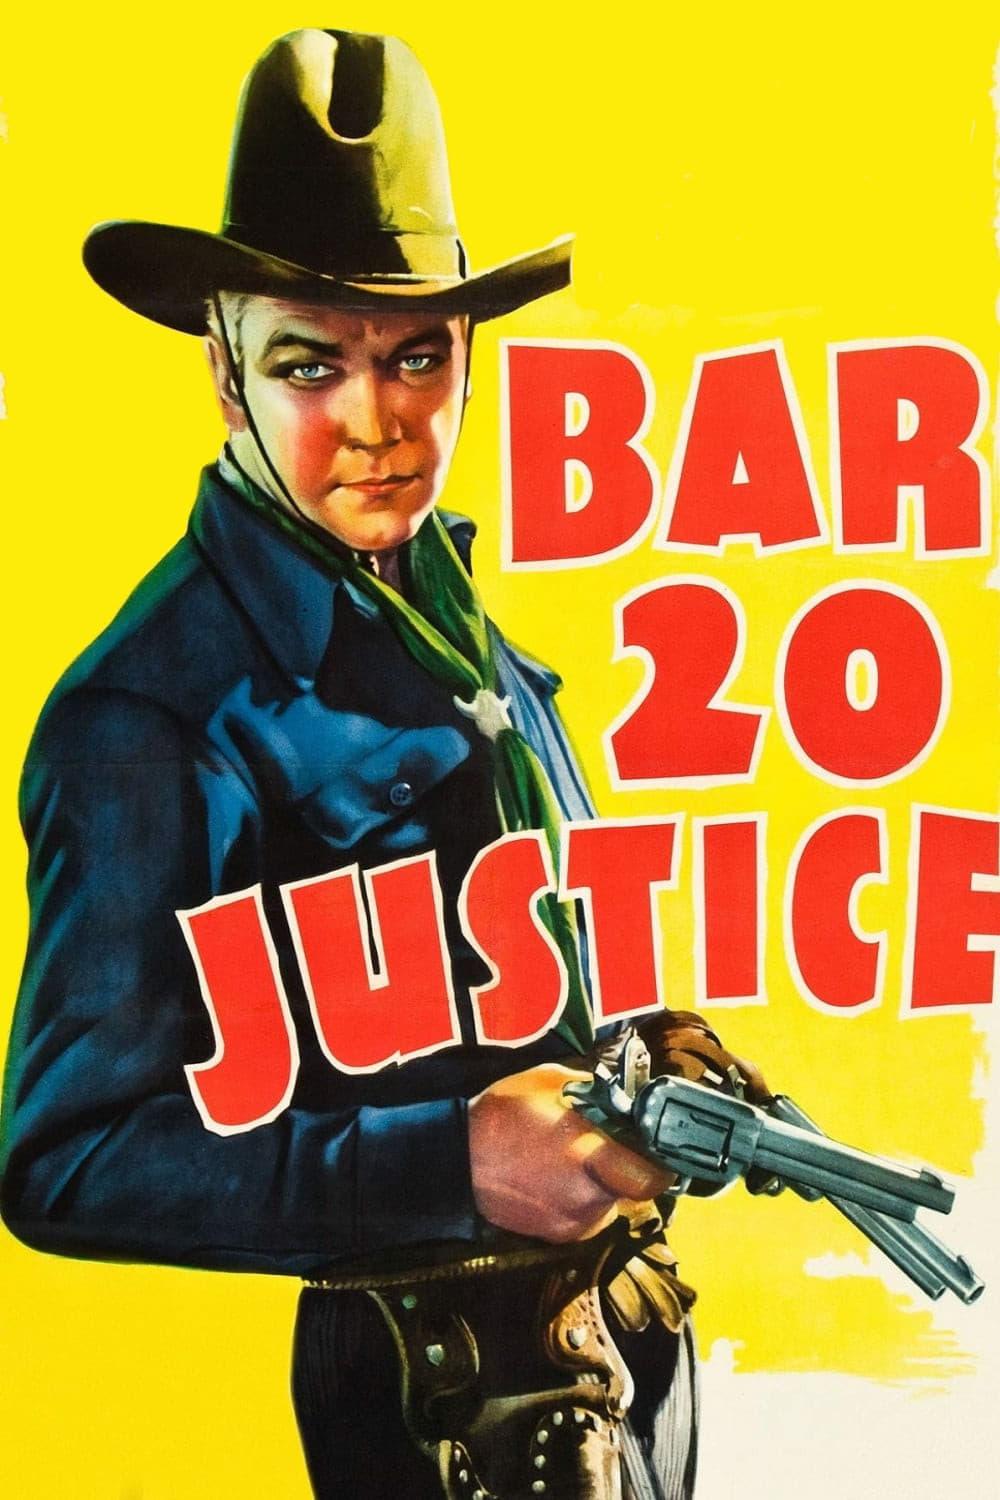 Bar 20 Justice poster